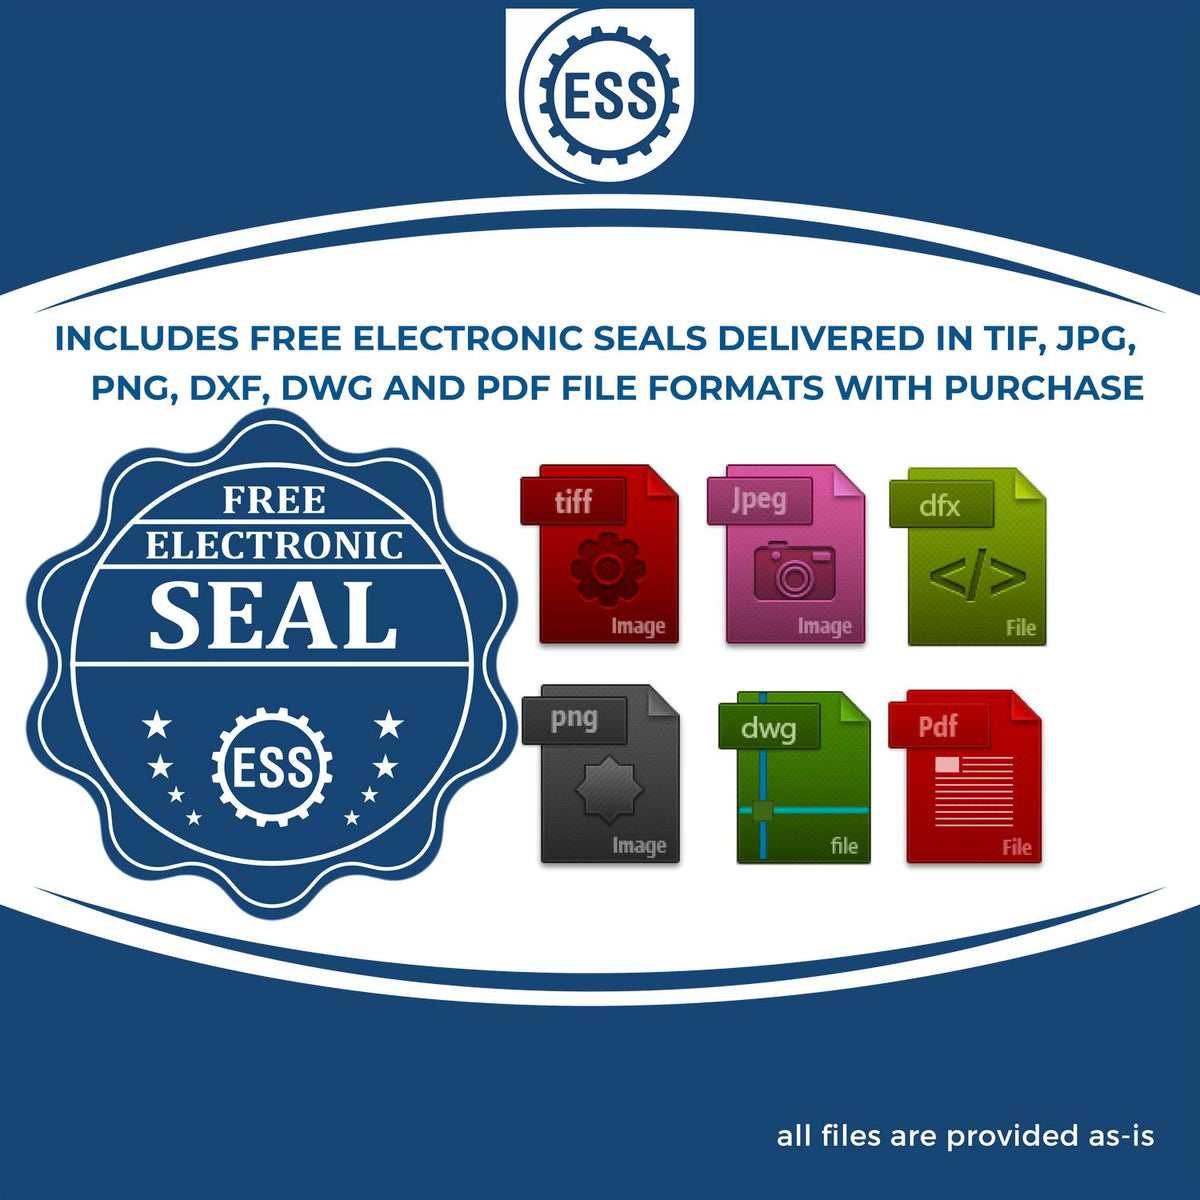 An infographic for the free electronic seal for the Soft North Carolina Professional Geologist Seal illustrating the different file type icons such as DXF, DWG, TIF, JPG and PNG.